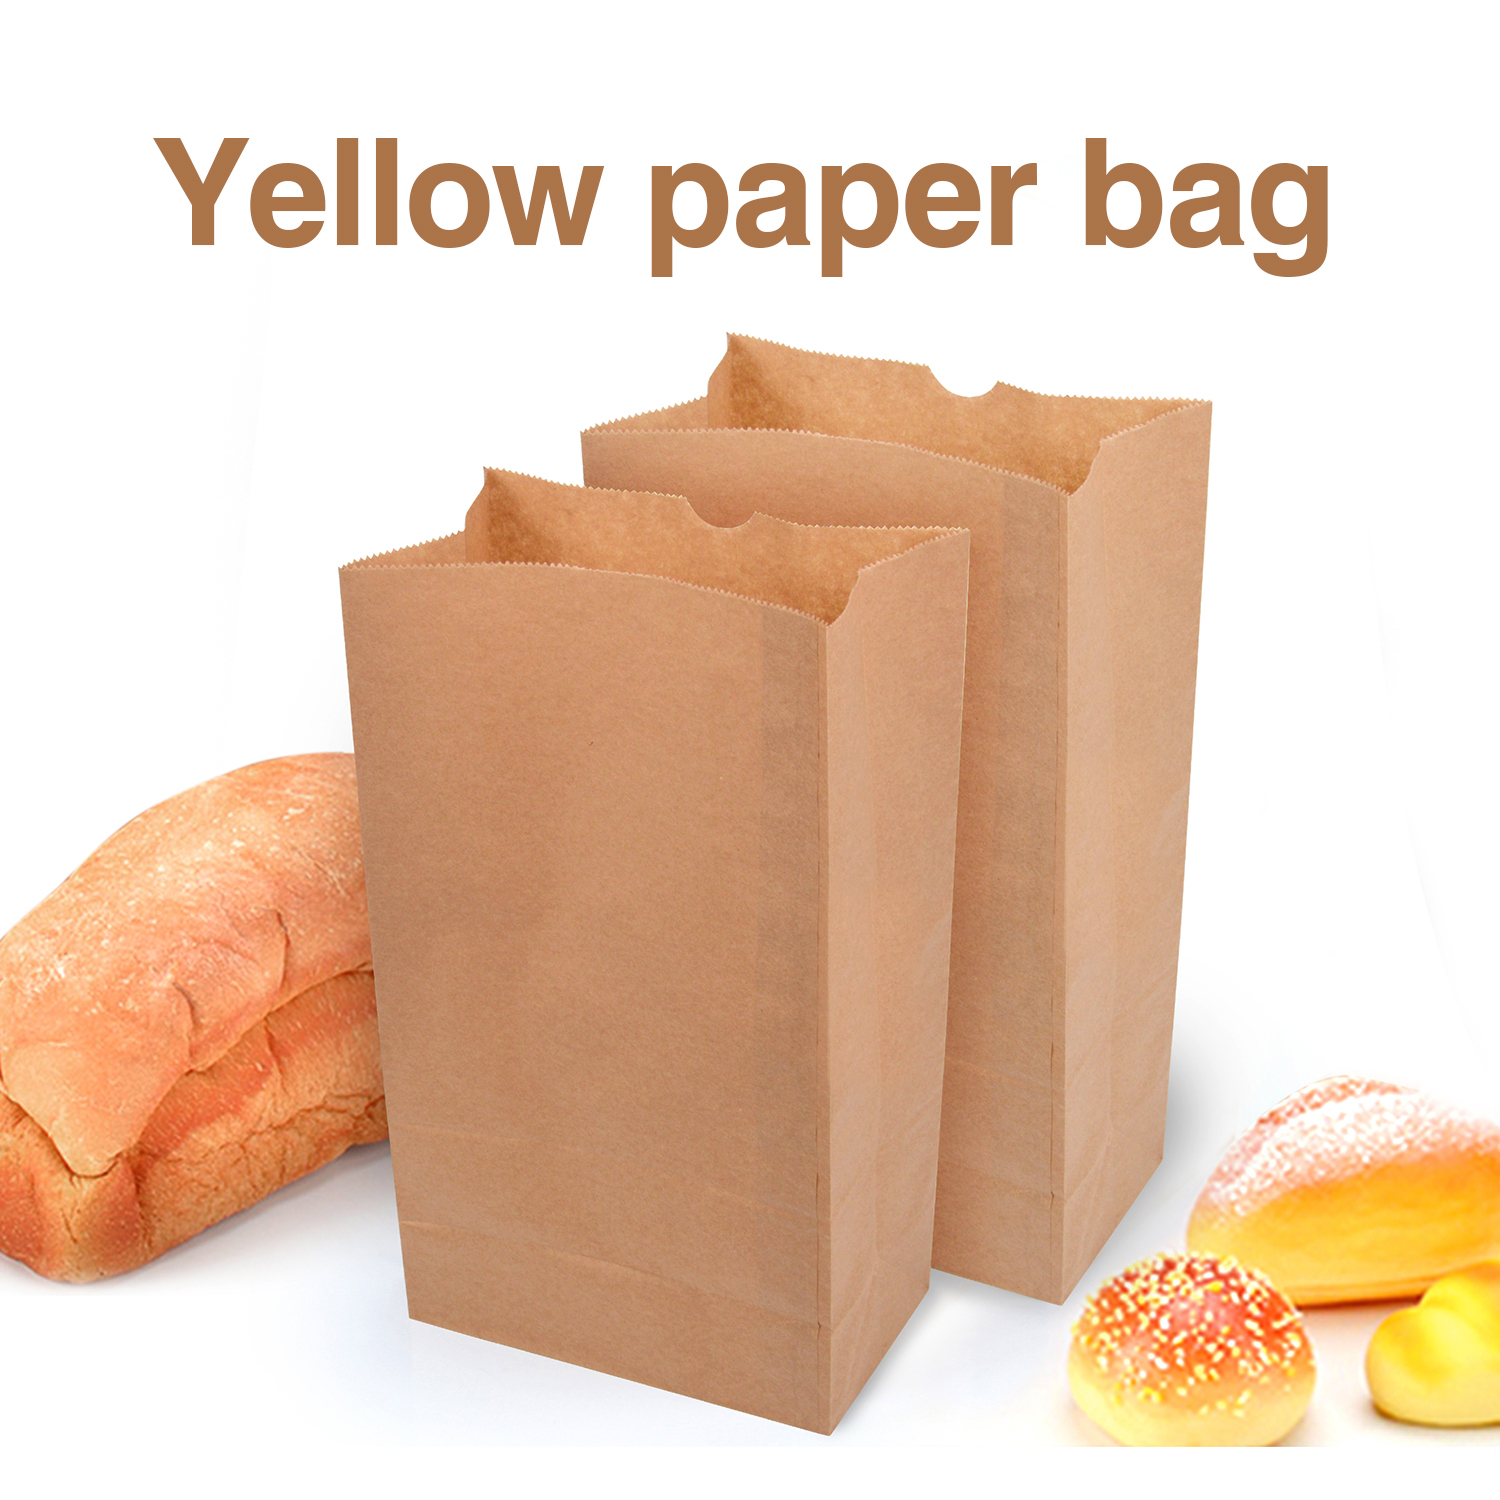 Kraft paper bag with square bottom, no hand-held handle, takeout bag, grocery bag, gift packaging, bread, hamburger packaging, paper bag